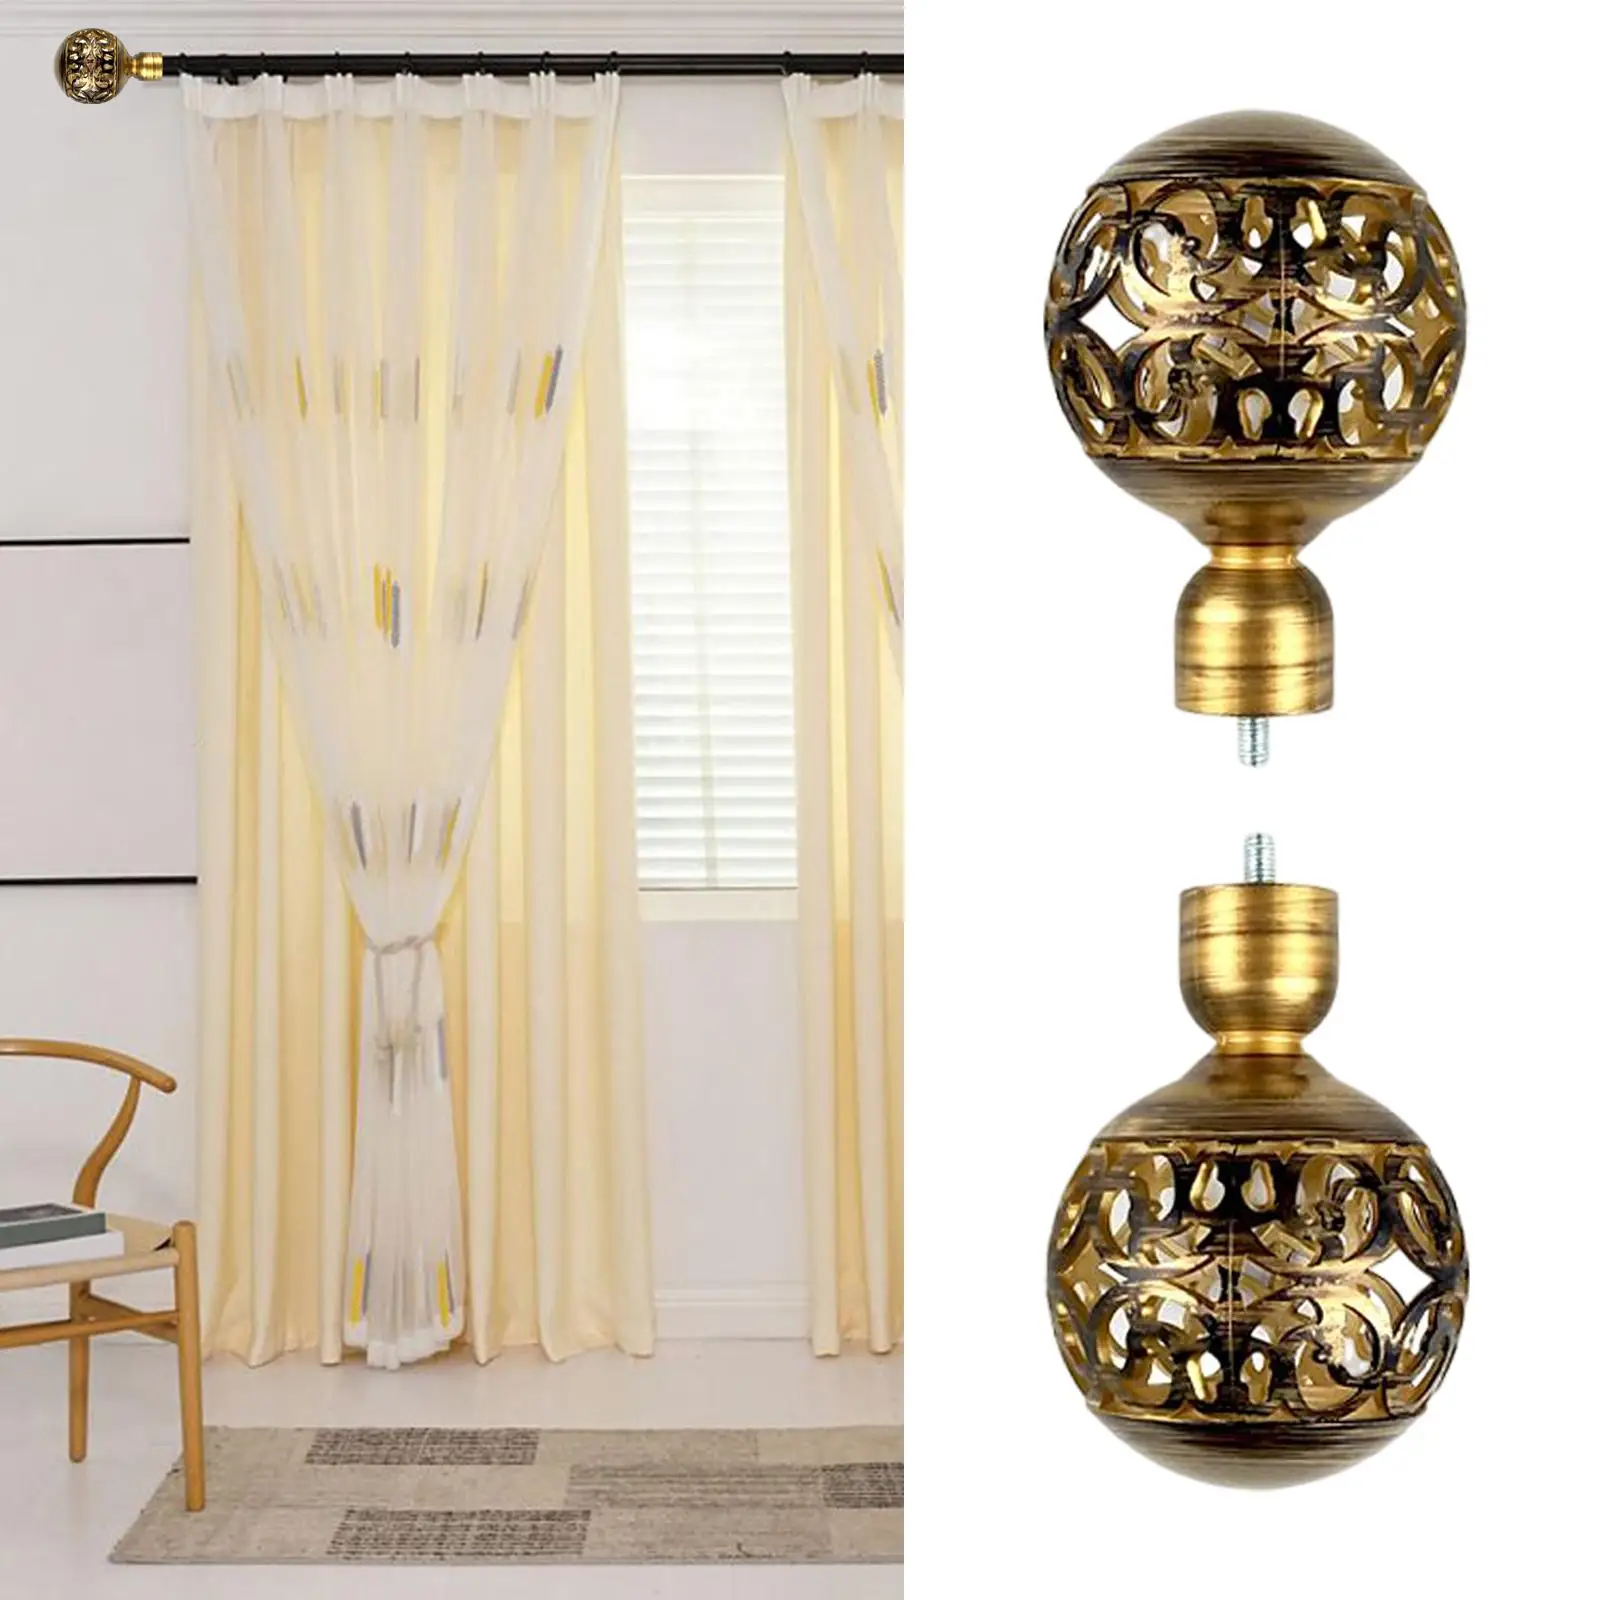 2x Hollow Curtain Rod Finials 3/4 inch Vintage Accessories Decoration Hardware Drapery Rod Finials for Office Home Bathroom